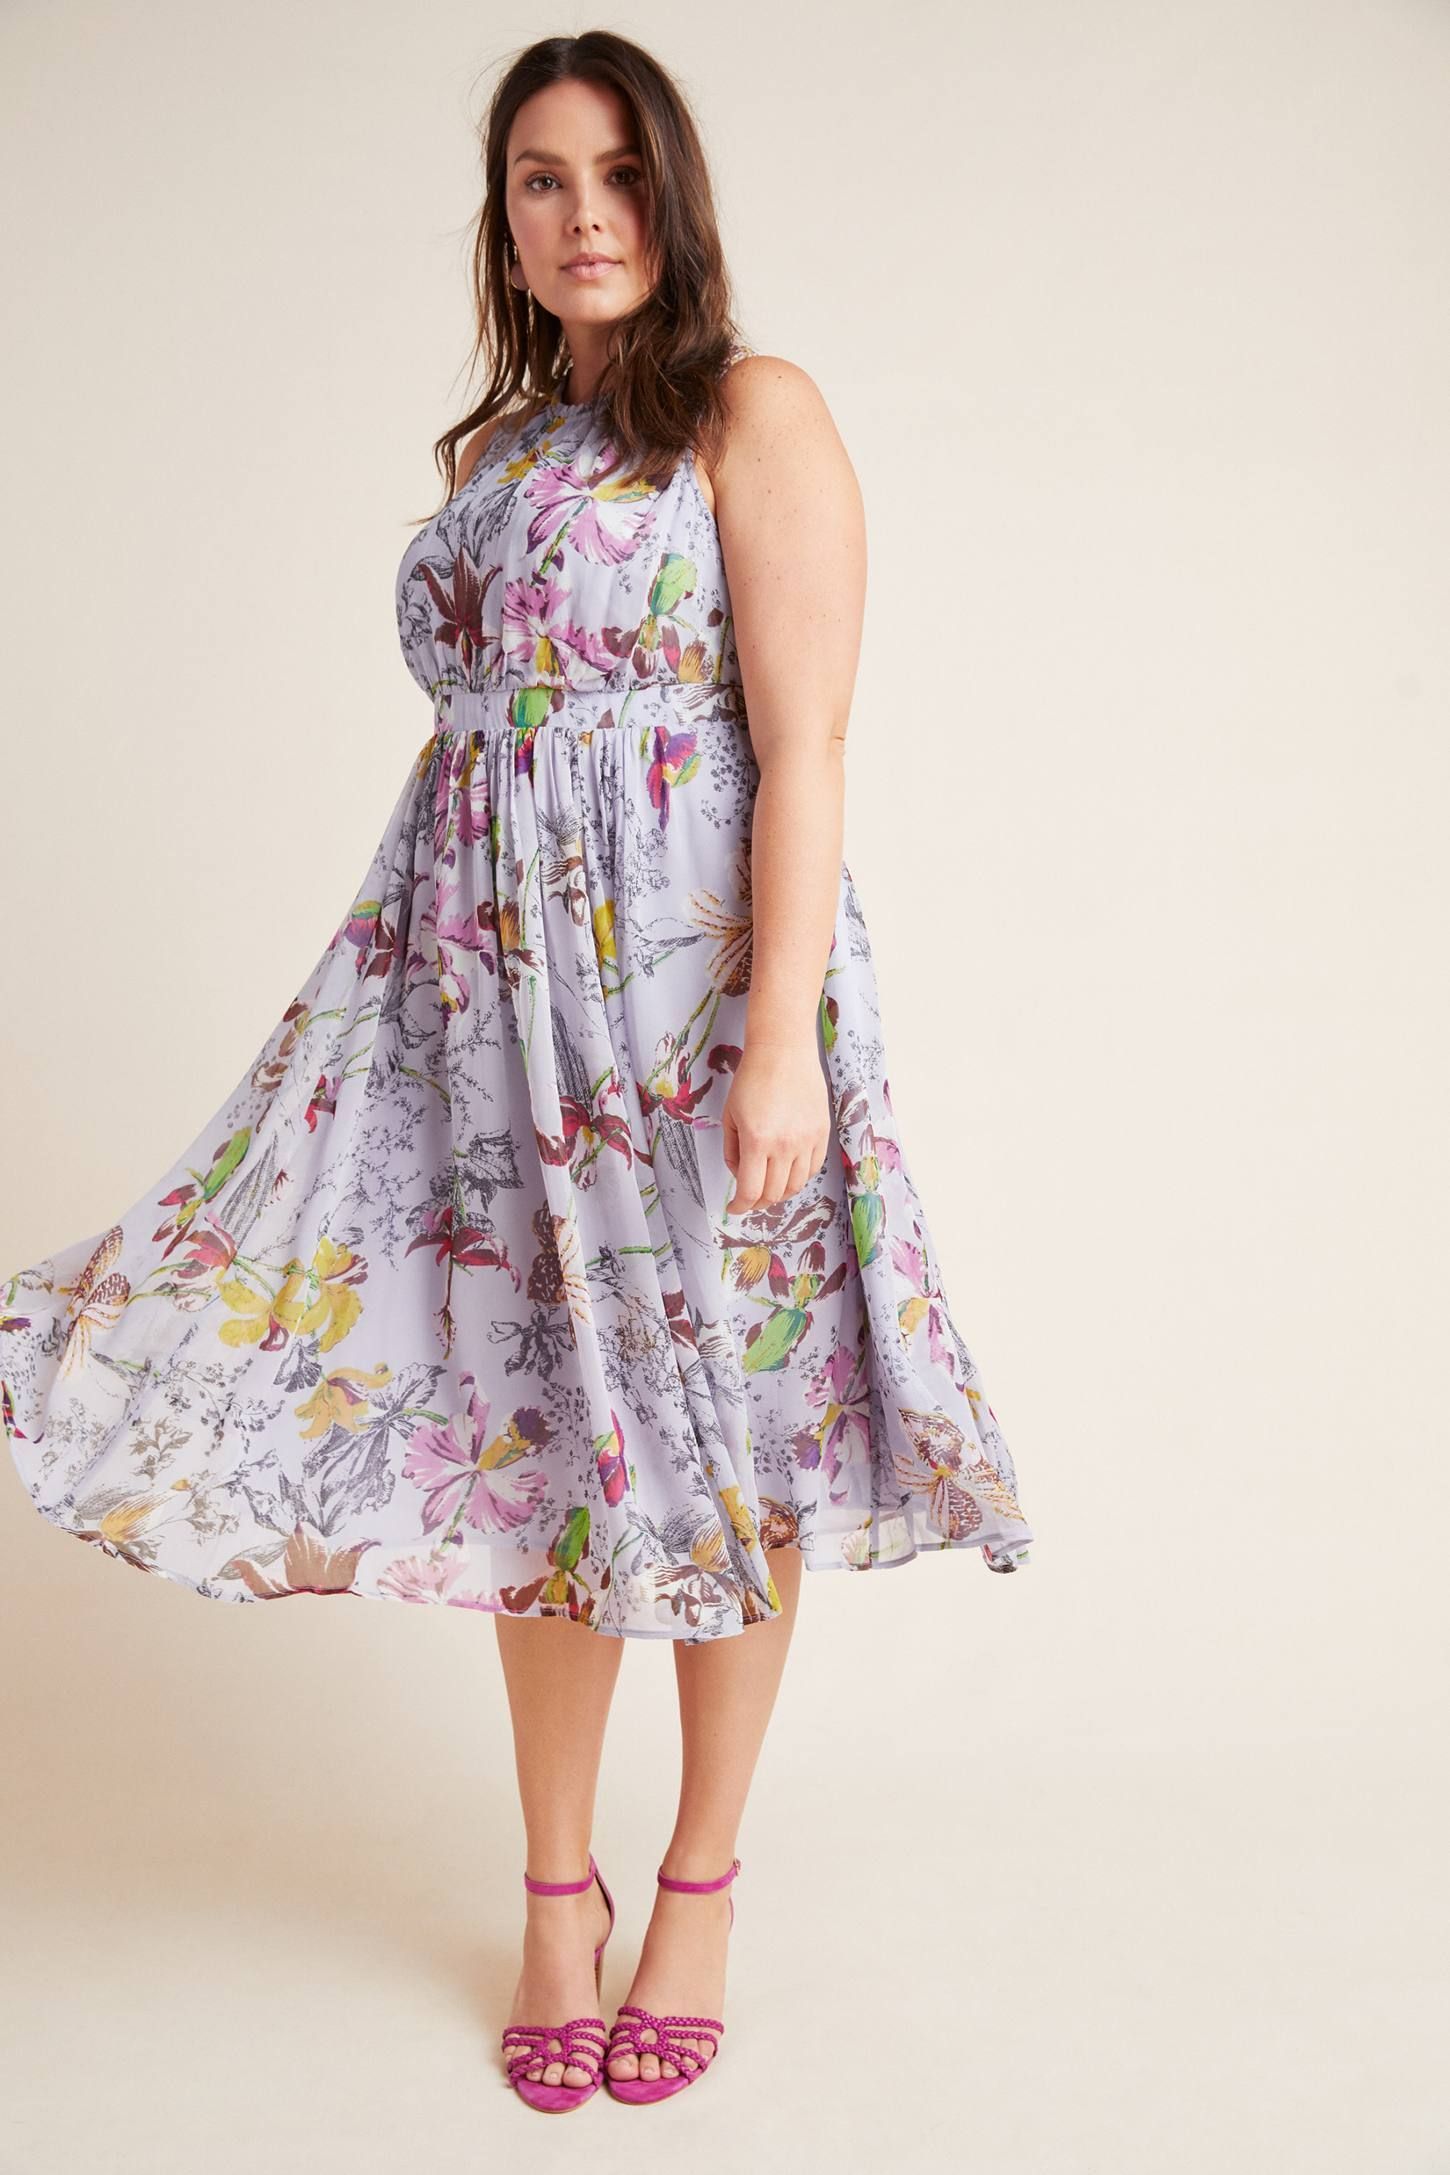 Take Center Stage In One Of These 27 Rehearsal Dinner Dresses